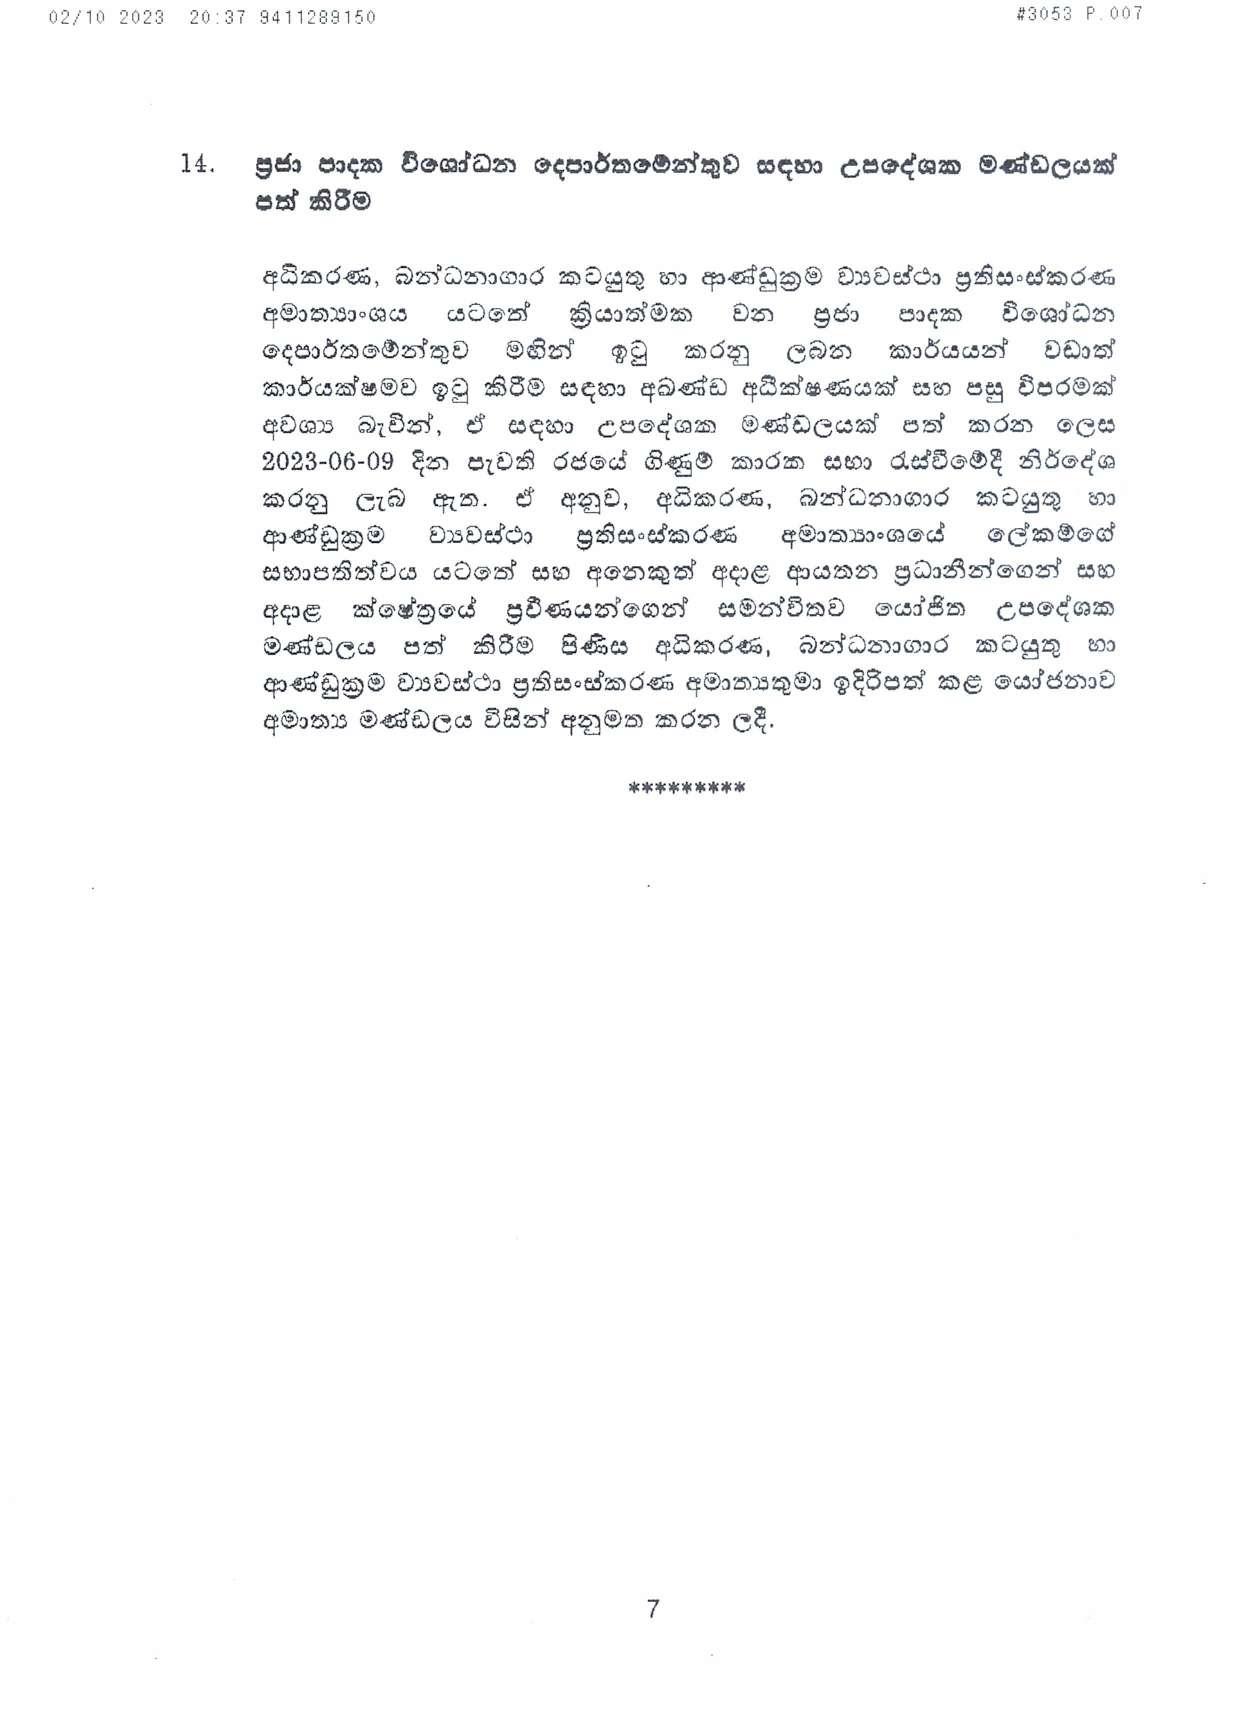 Cabinet Decision on 02.10.2023 page 007